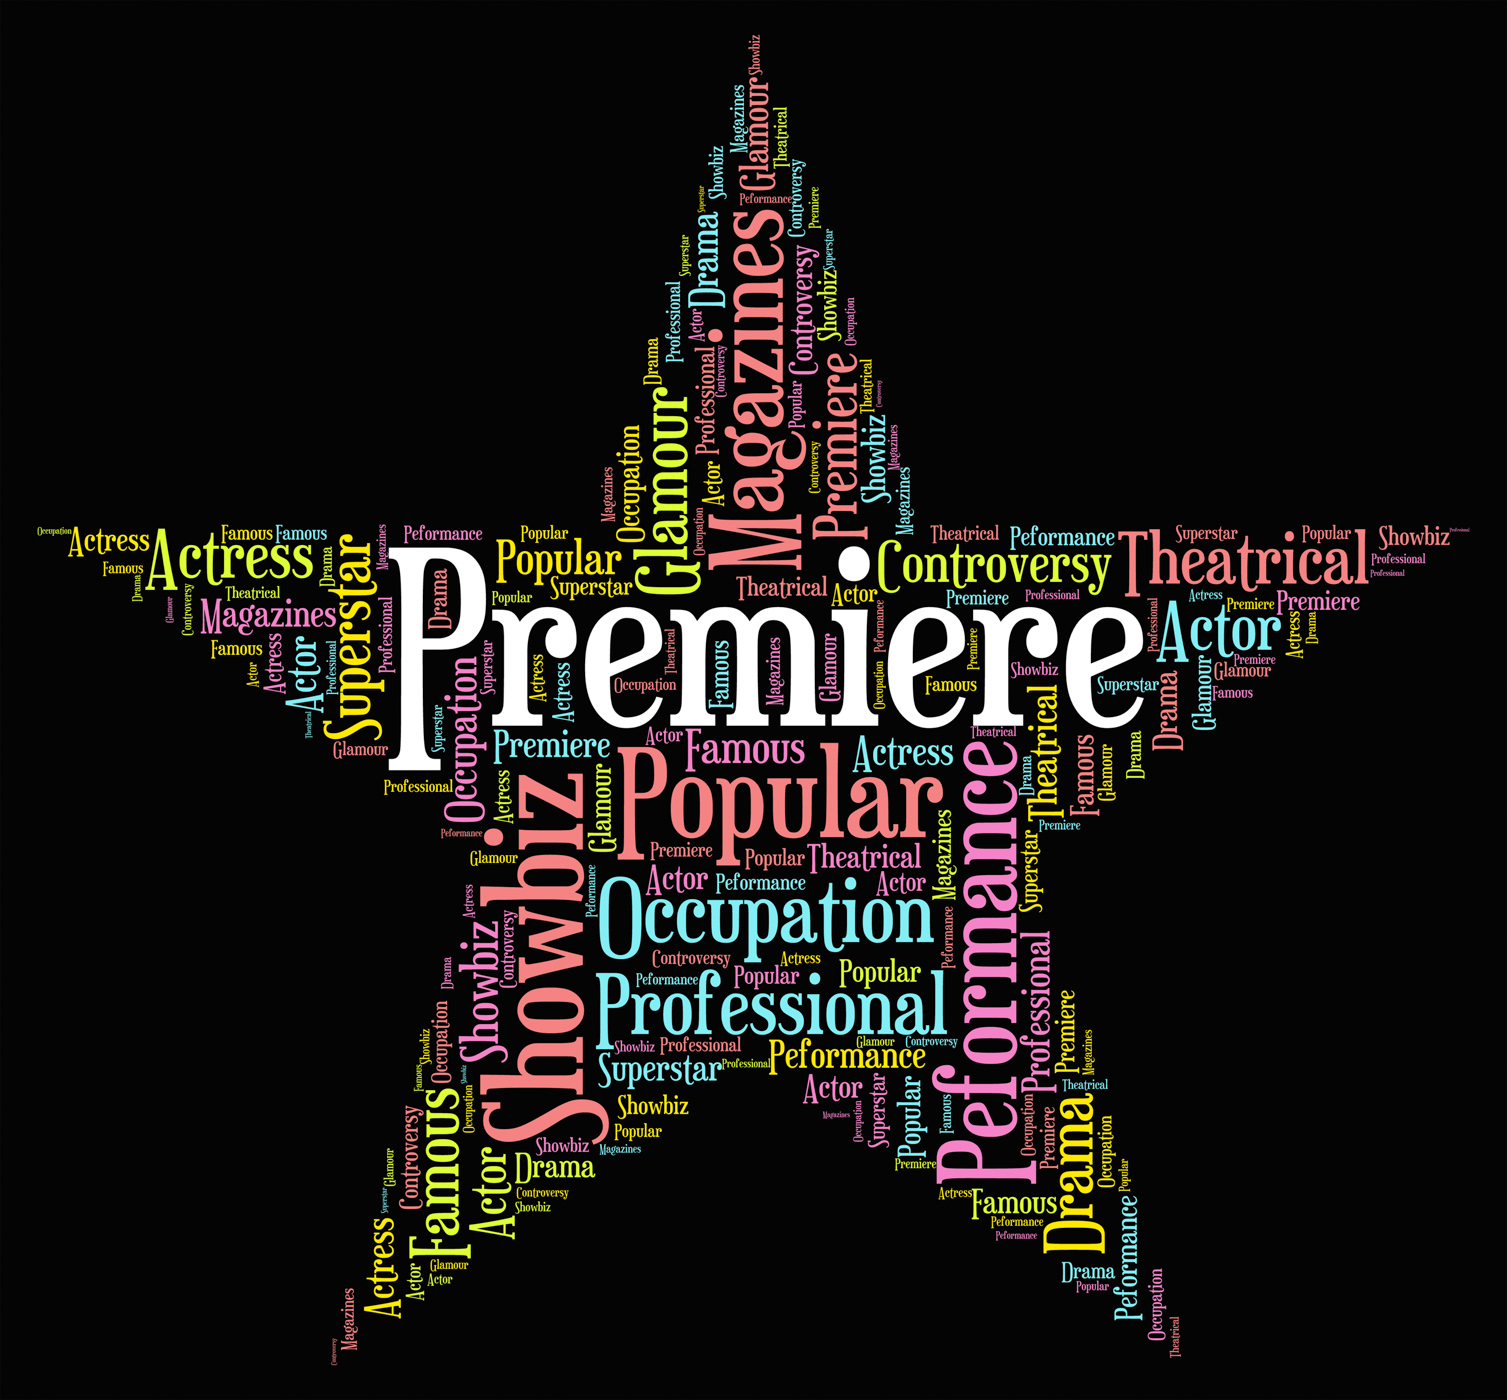 Premiere star represents opening nights and perfomance photo